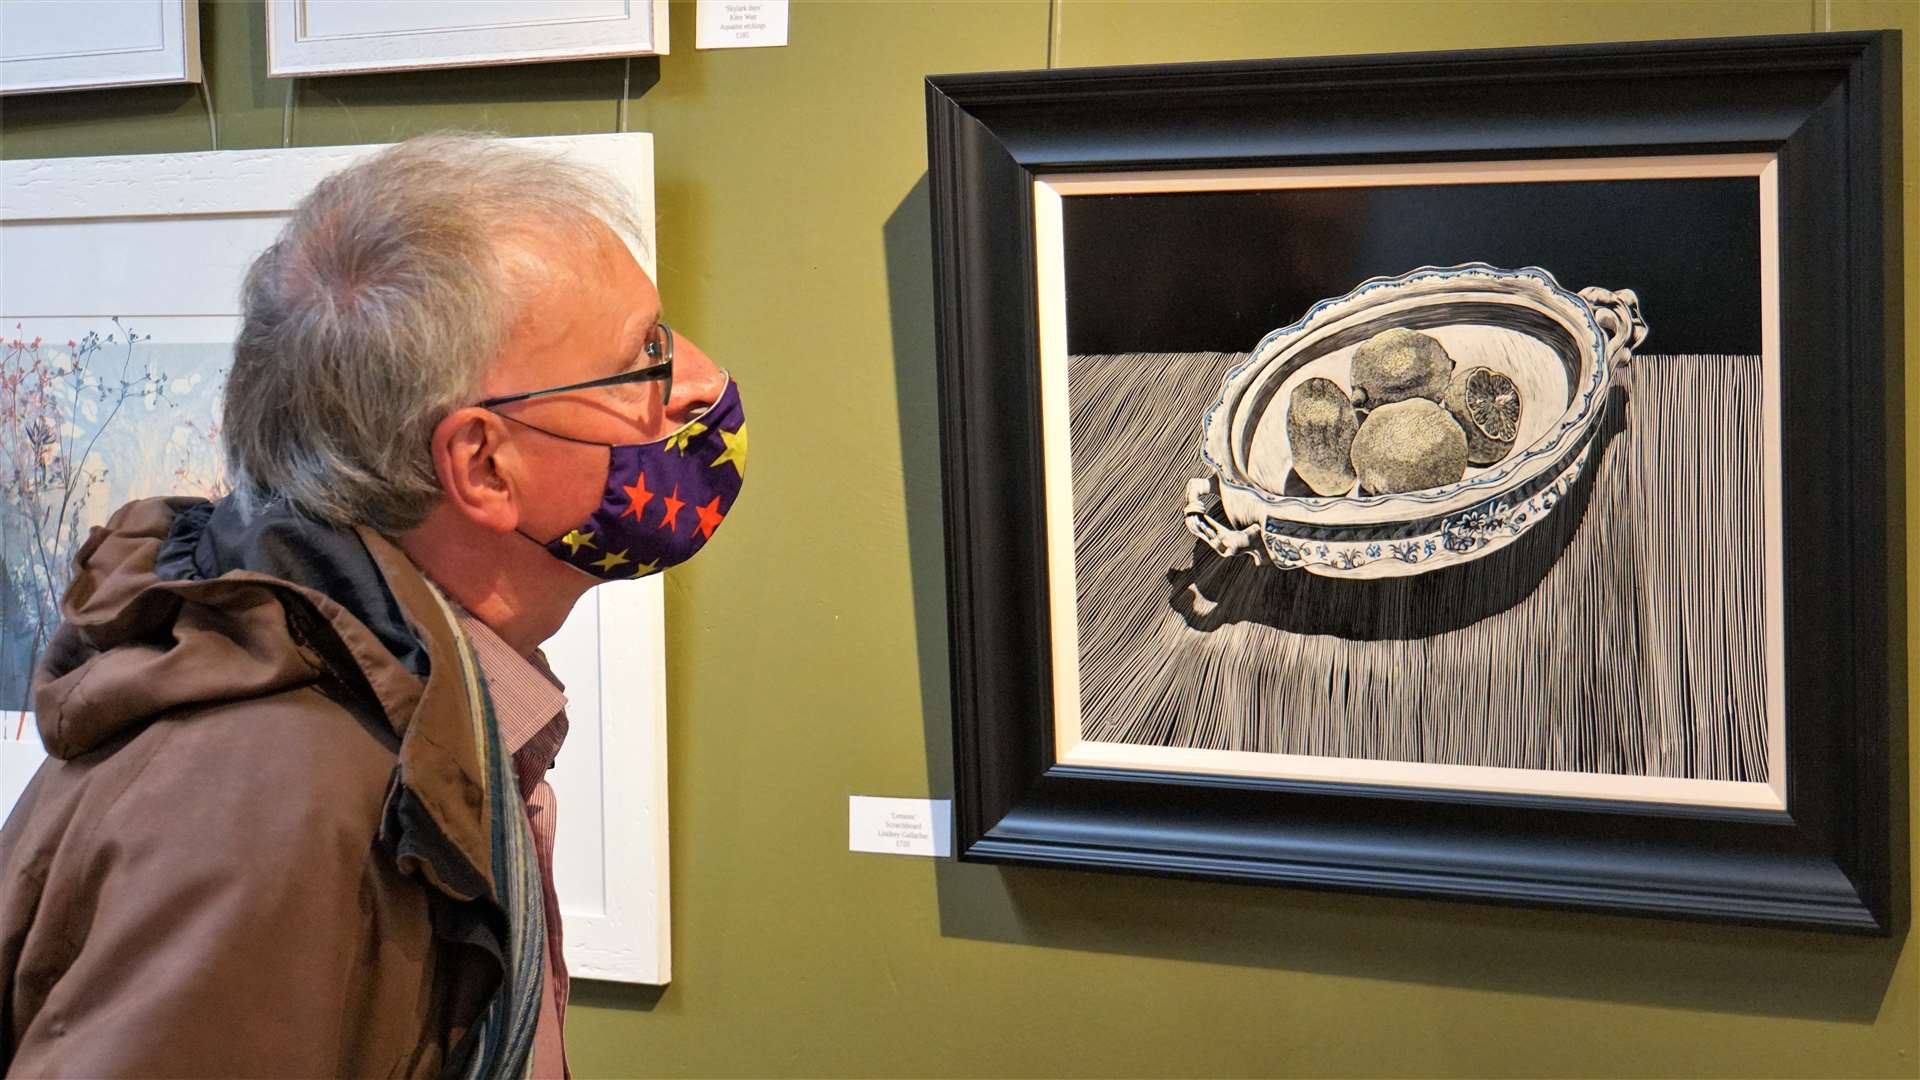 Local artist and connoisseur Ian Pearson looks at one of Lindsey Gallacher's scratchboard works.